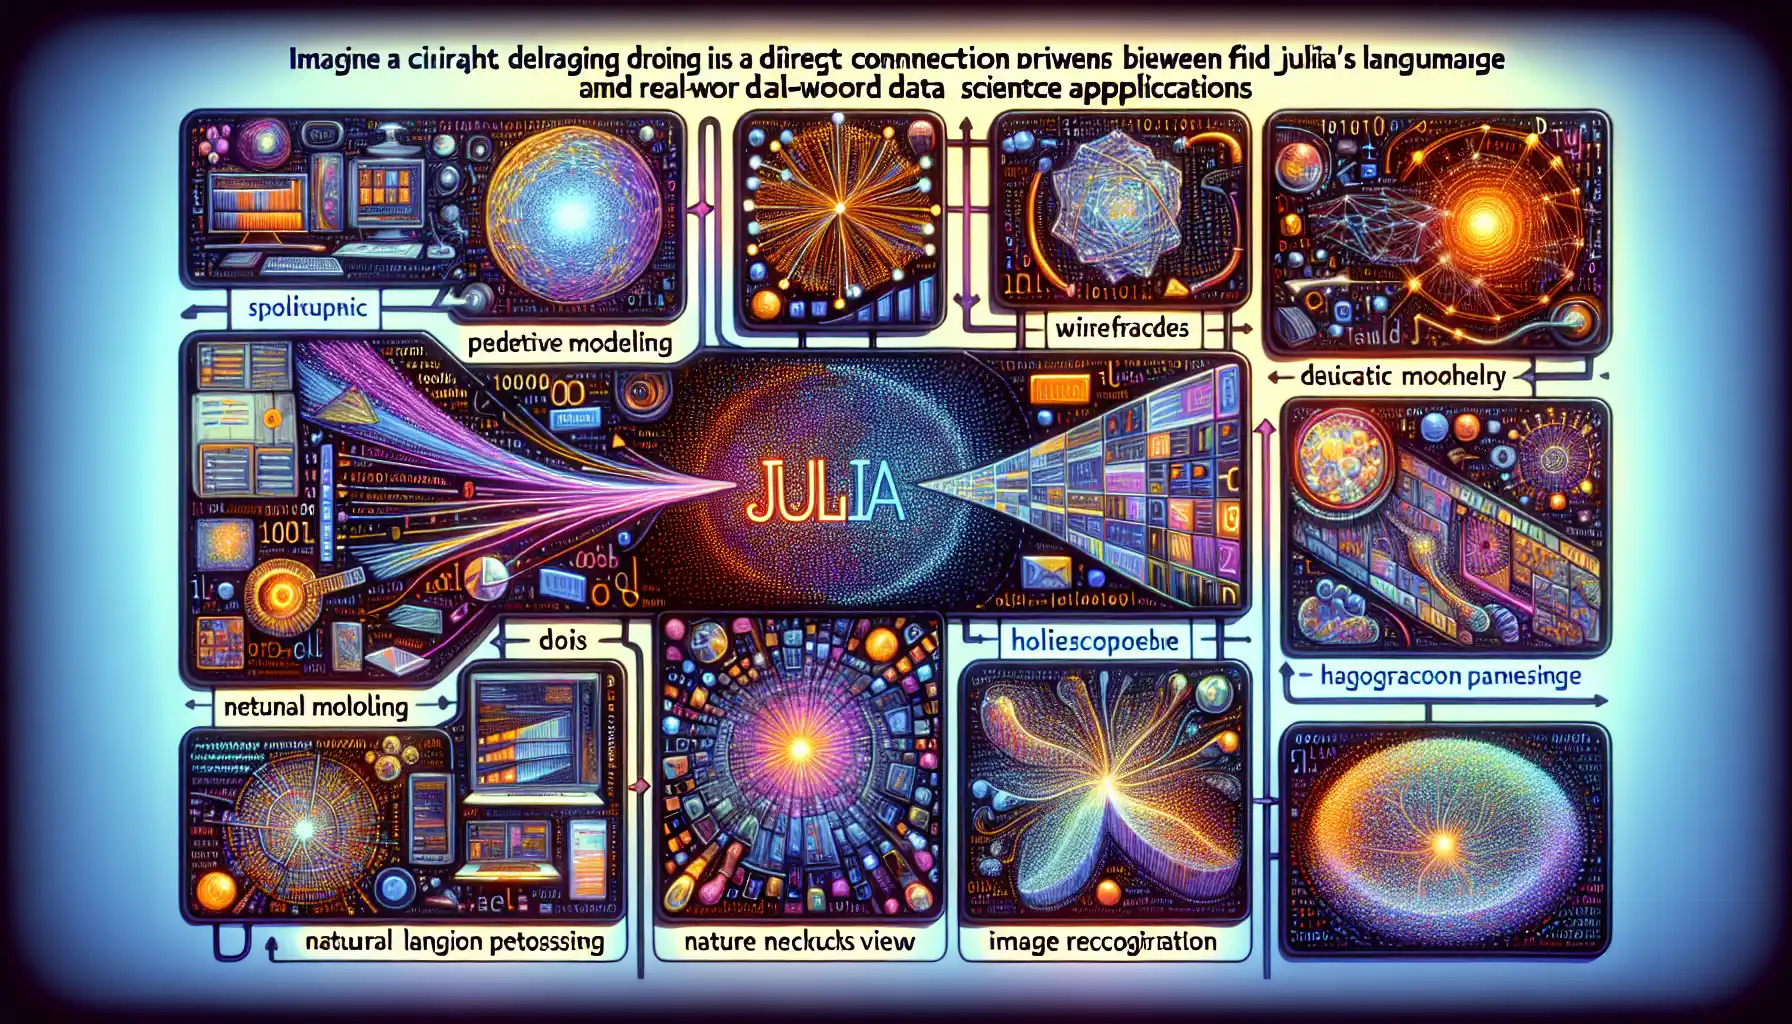 Julia in Action: Data Science Applications